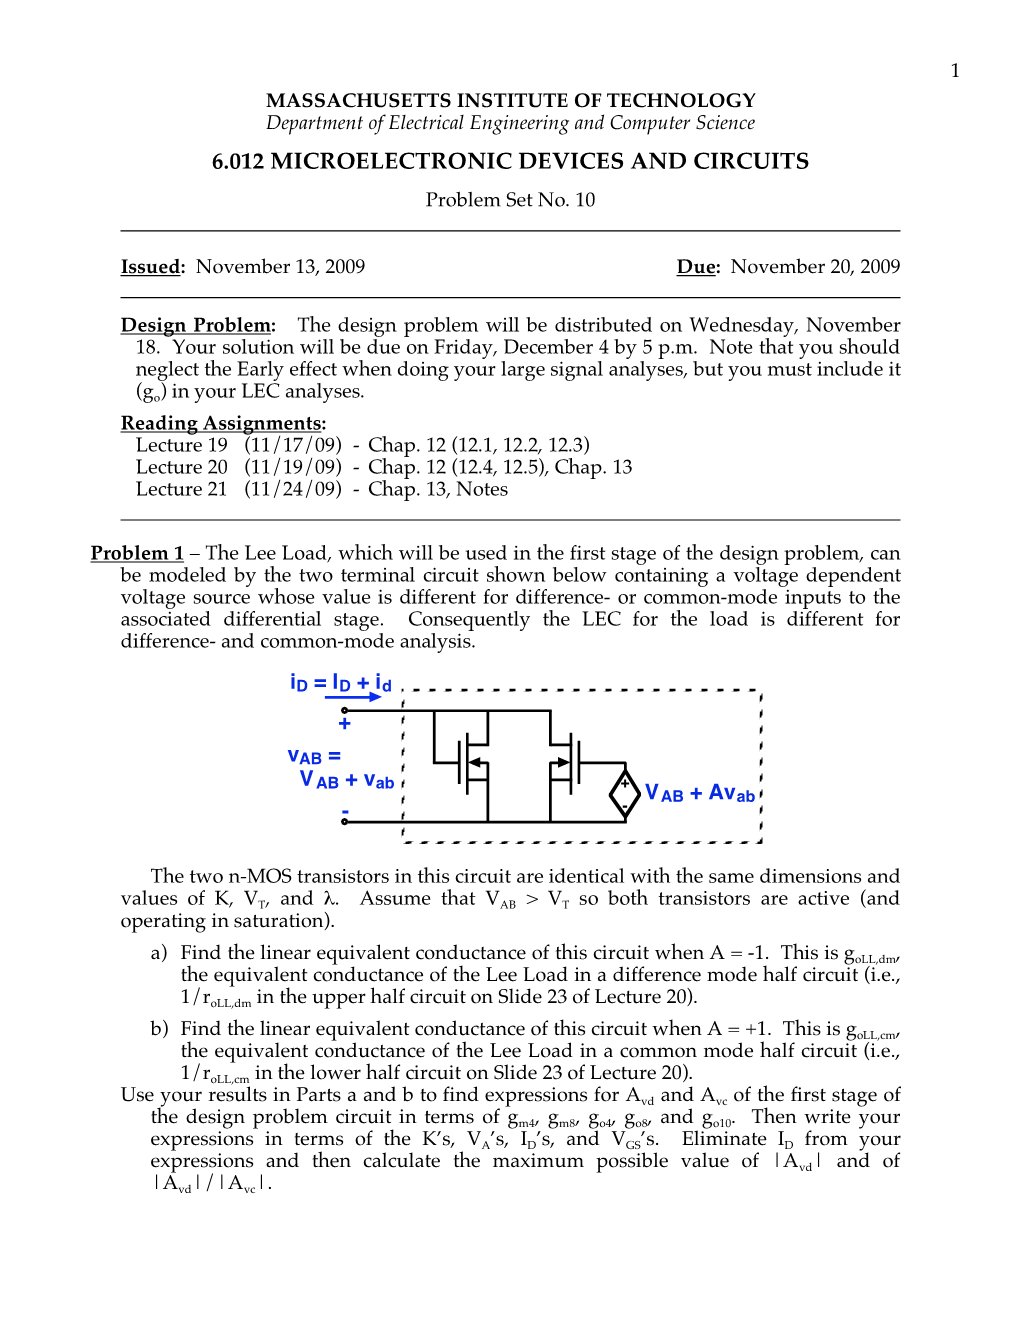 6.012 Microelectronic Devices and Circuits, Problem Set 10